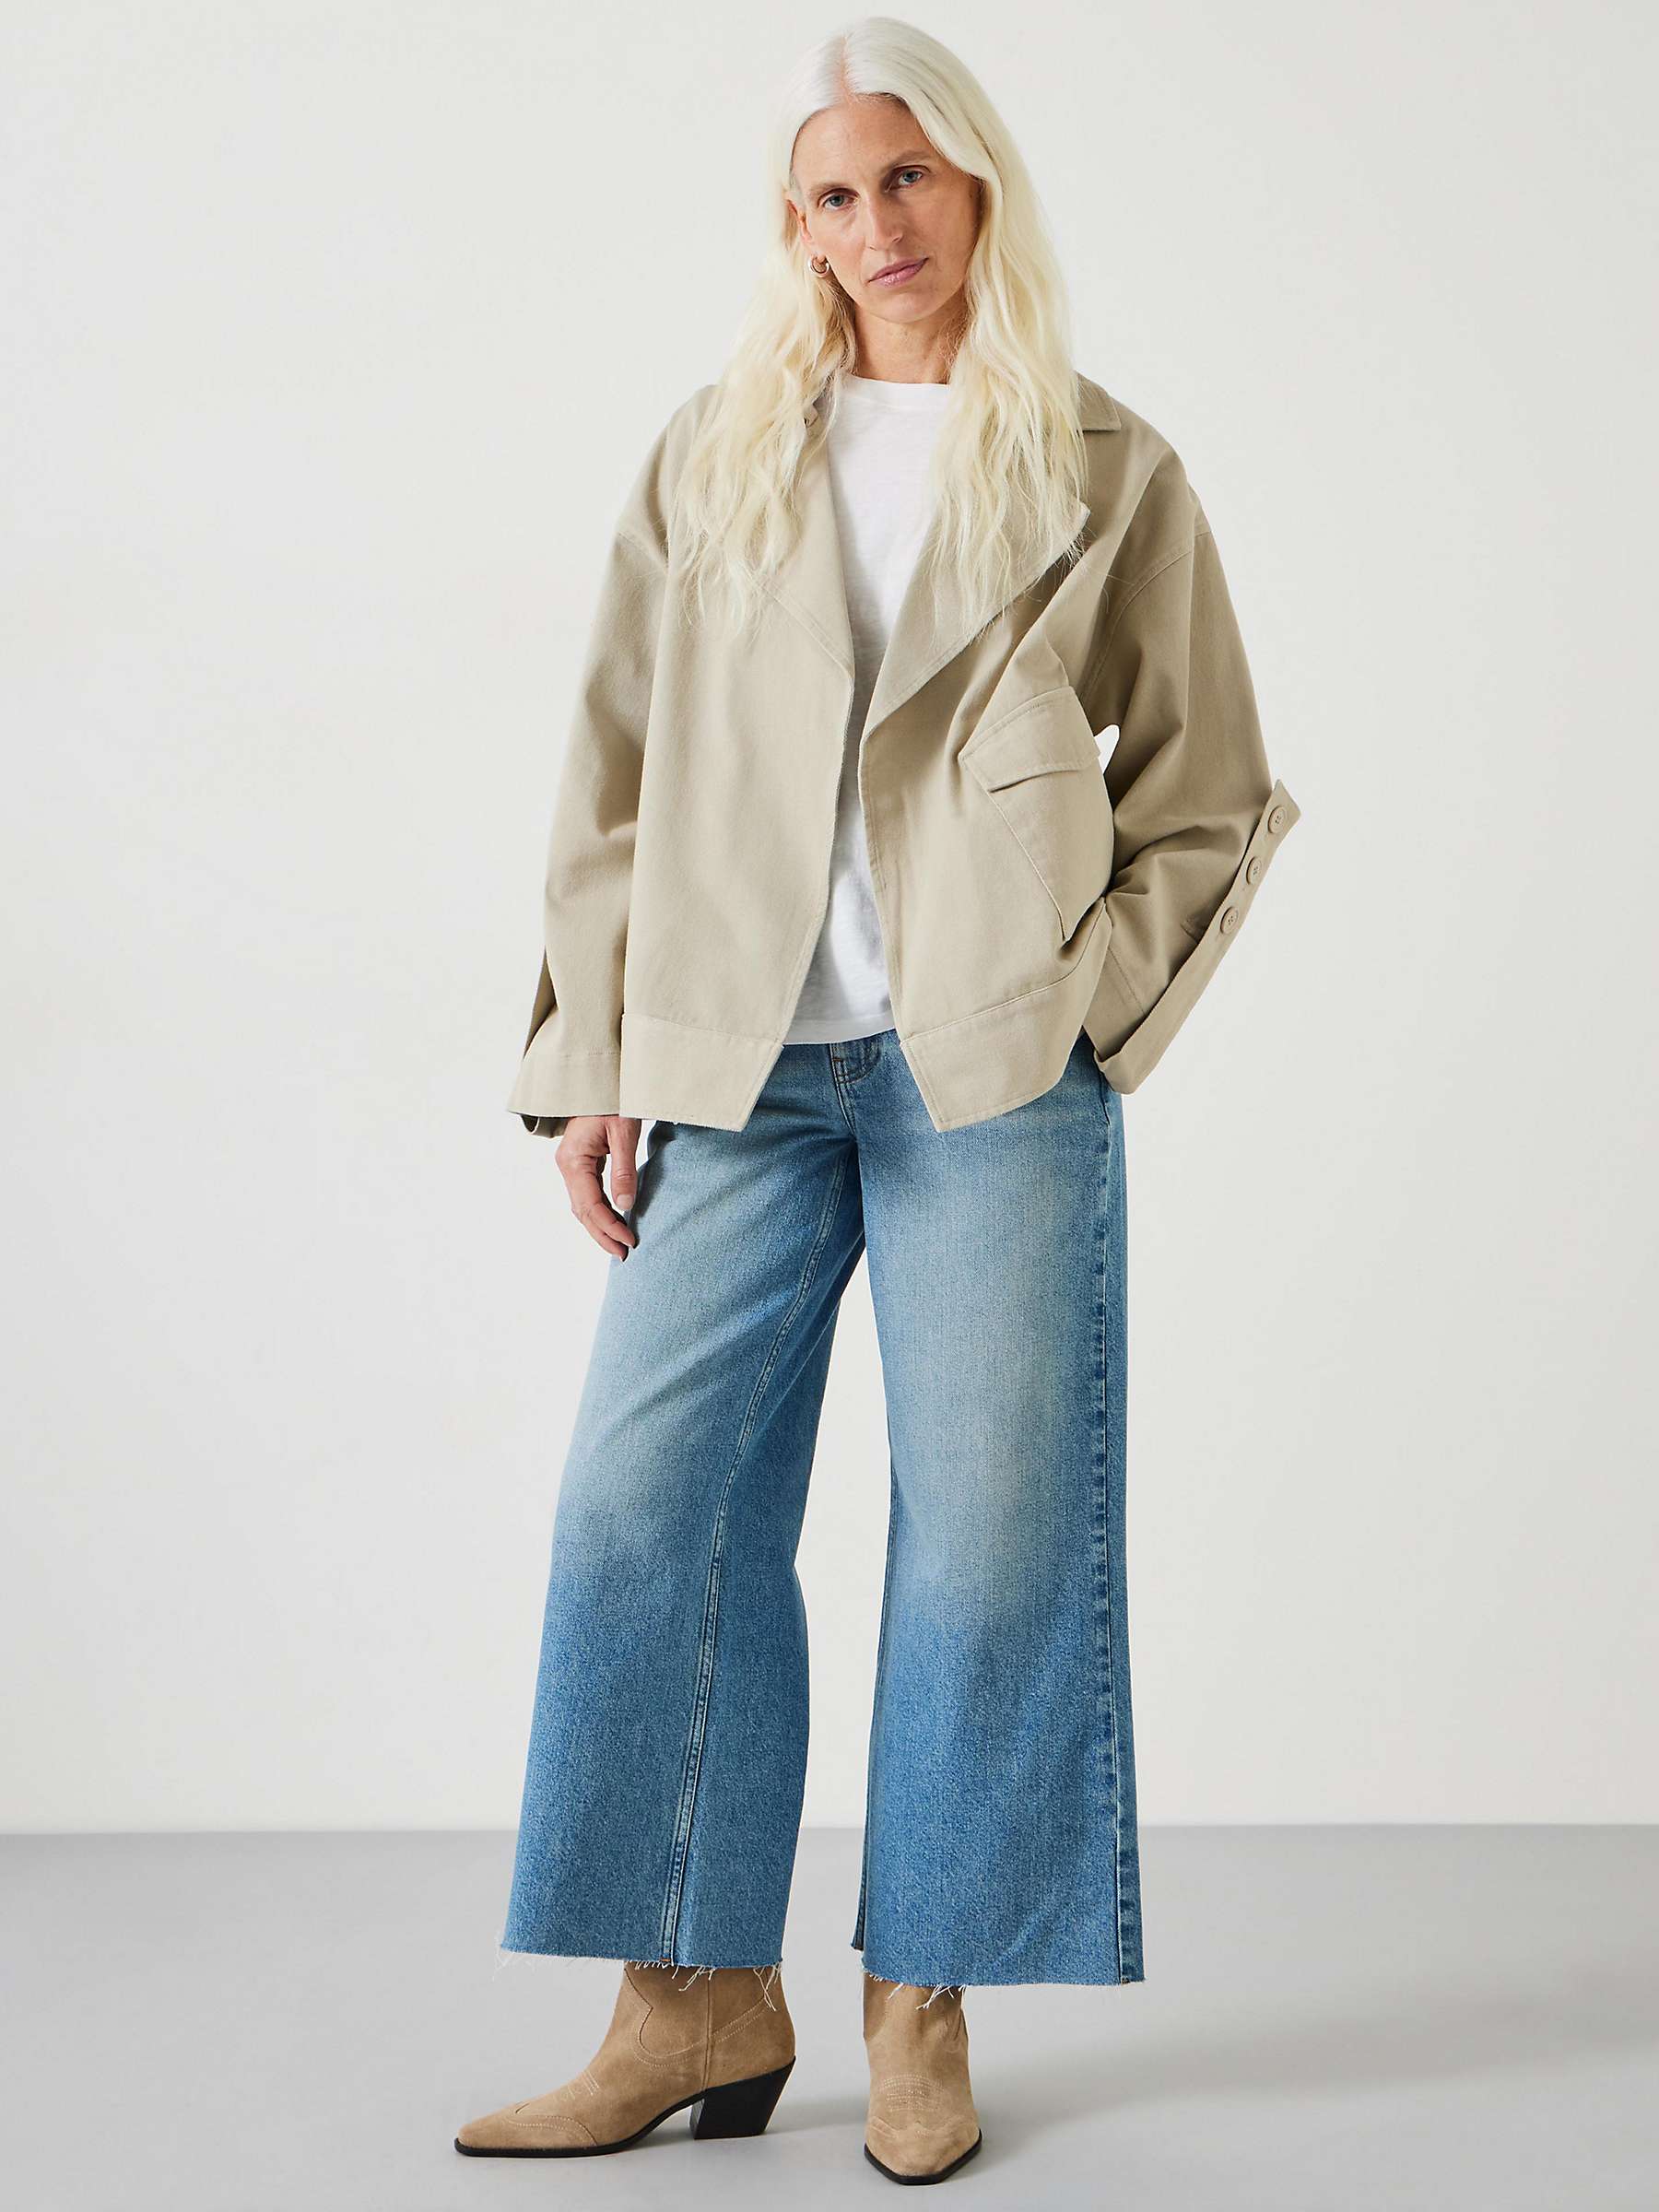 Buy HUSH Abi Cropped Wide Leg Jeans, Mid Authentic Online at johnlewis.com